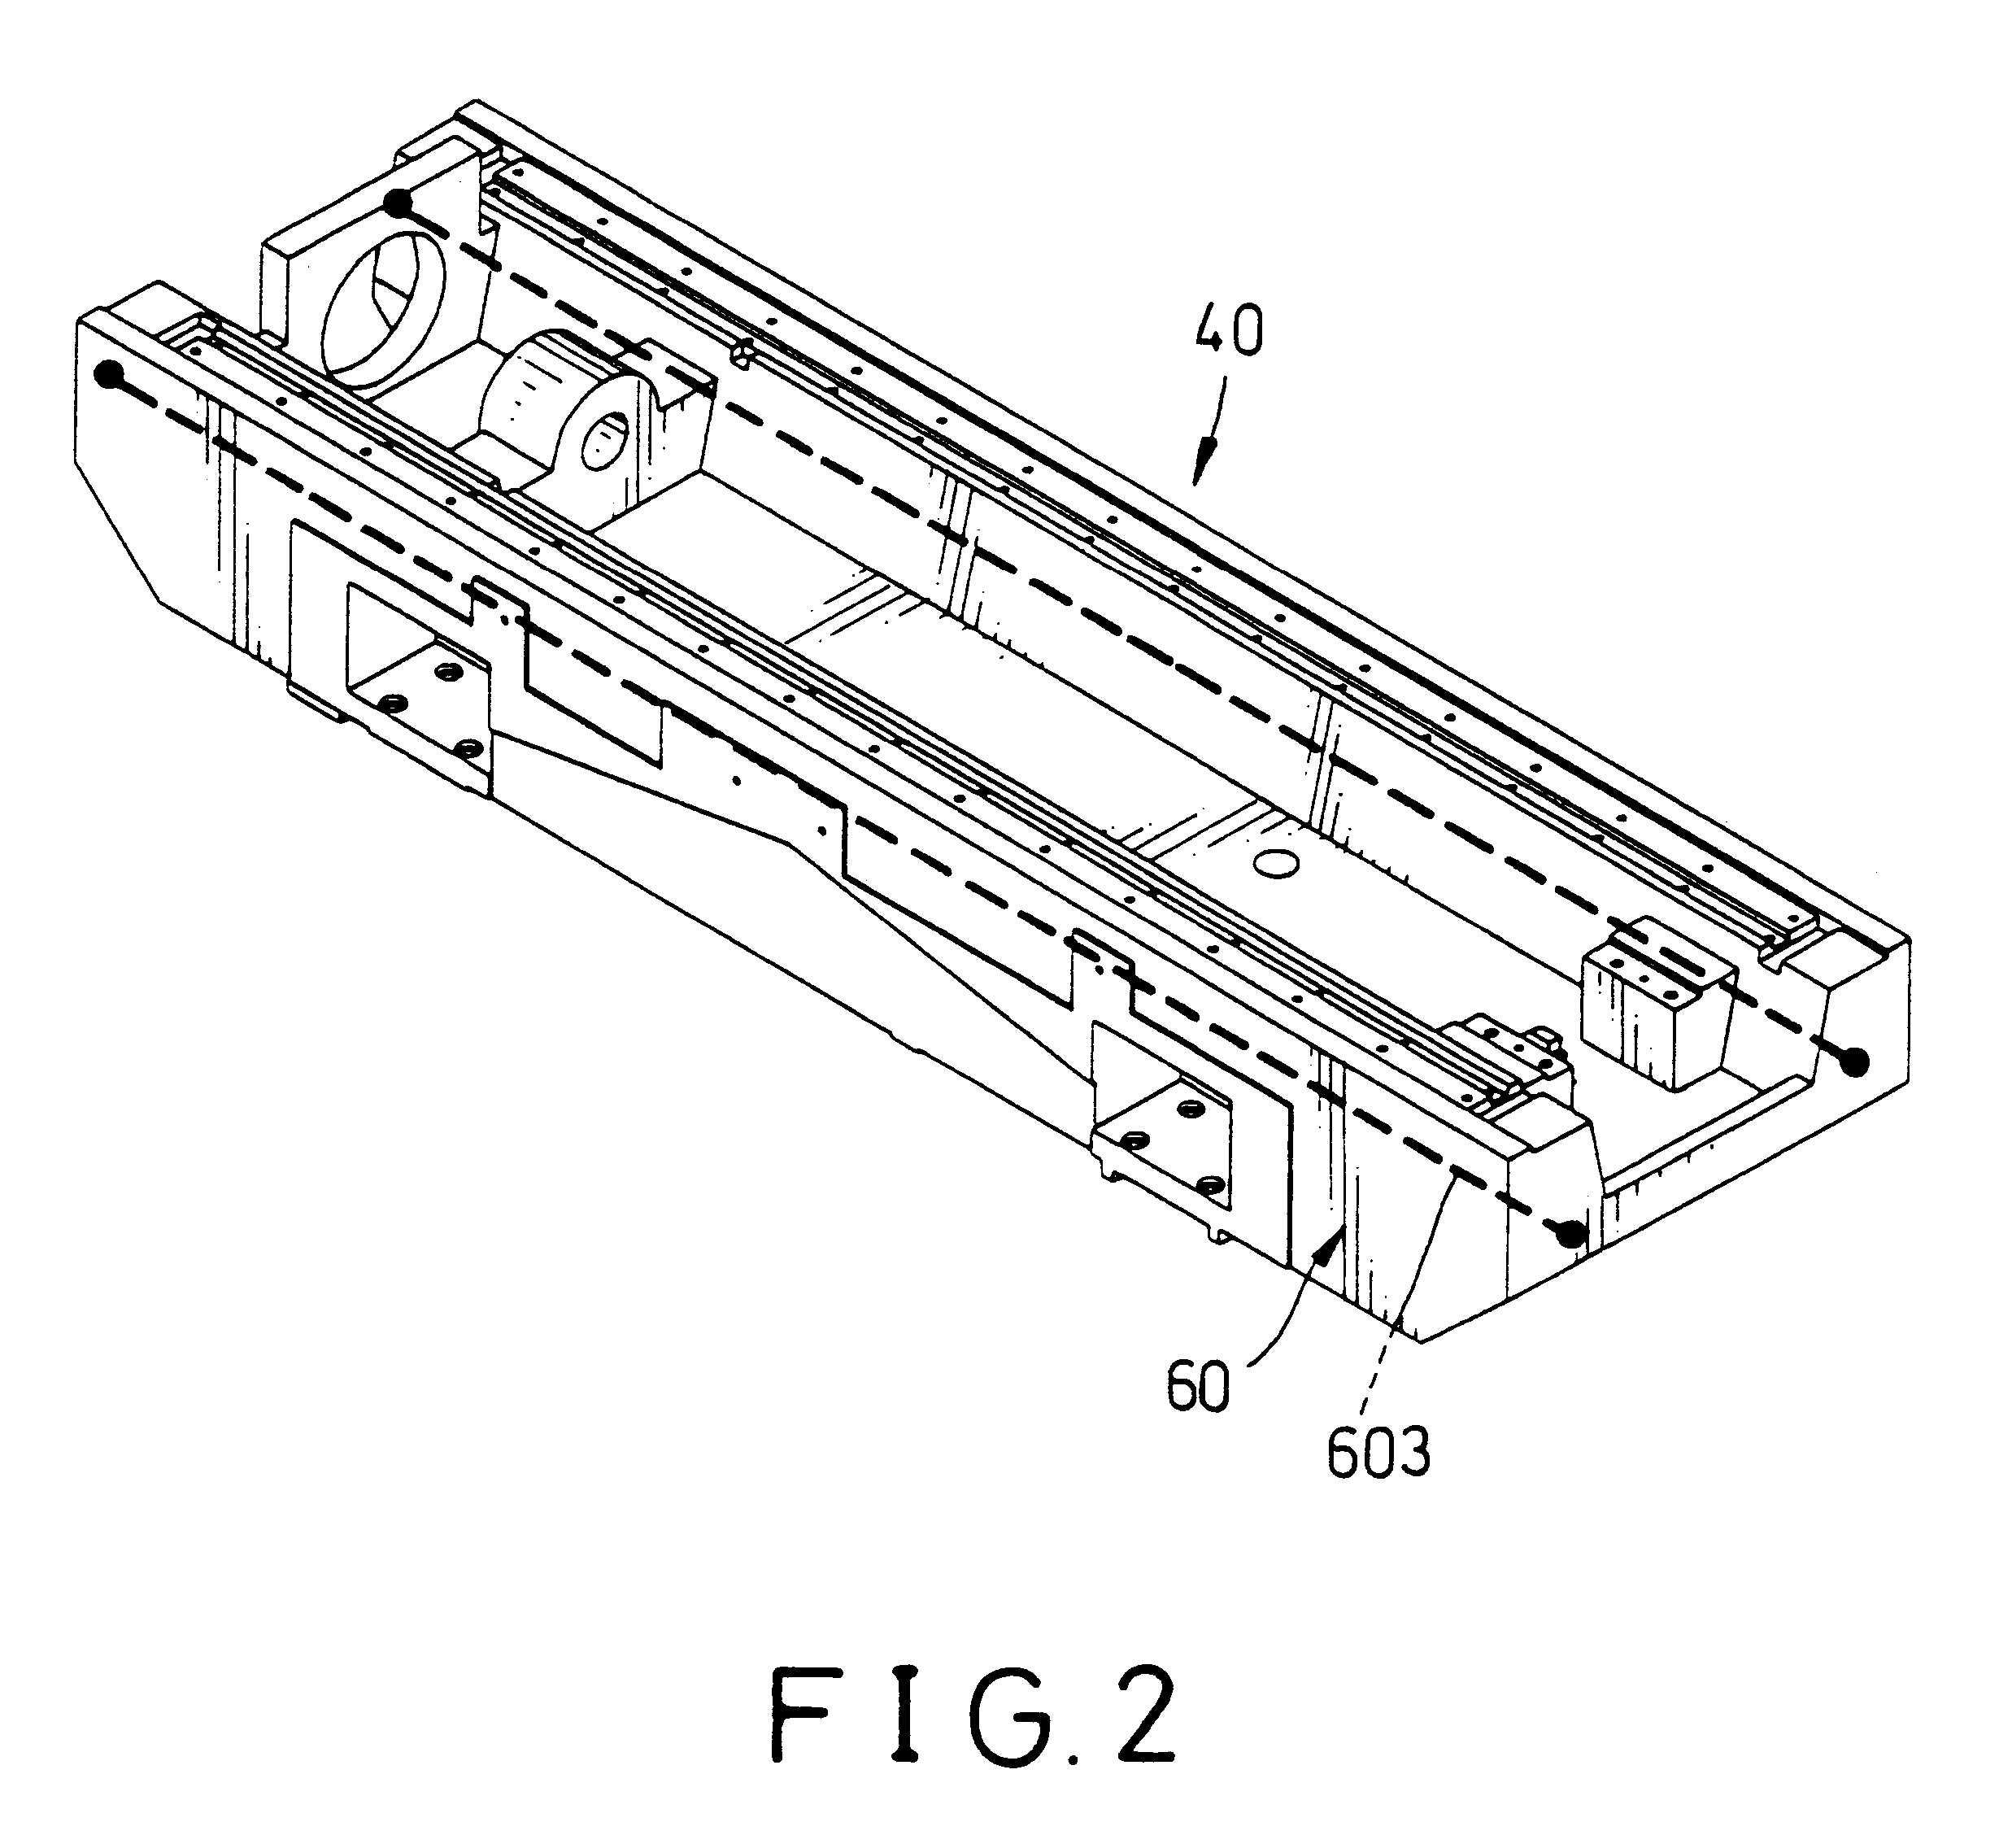 Prestressing device for a mechanical finishing device